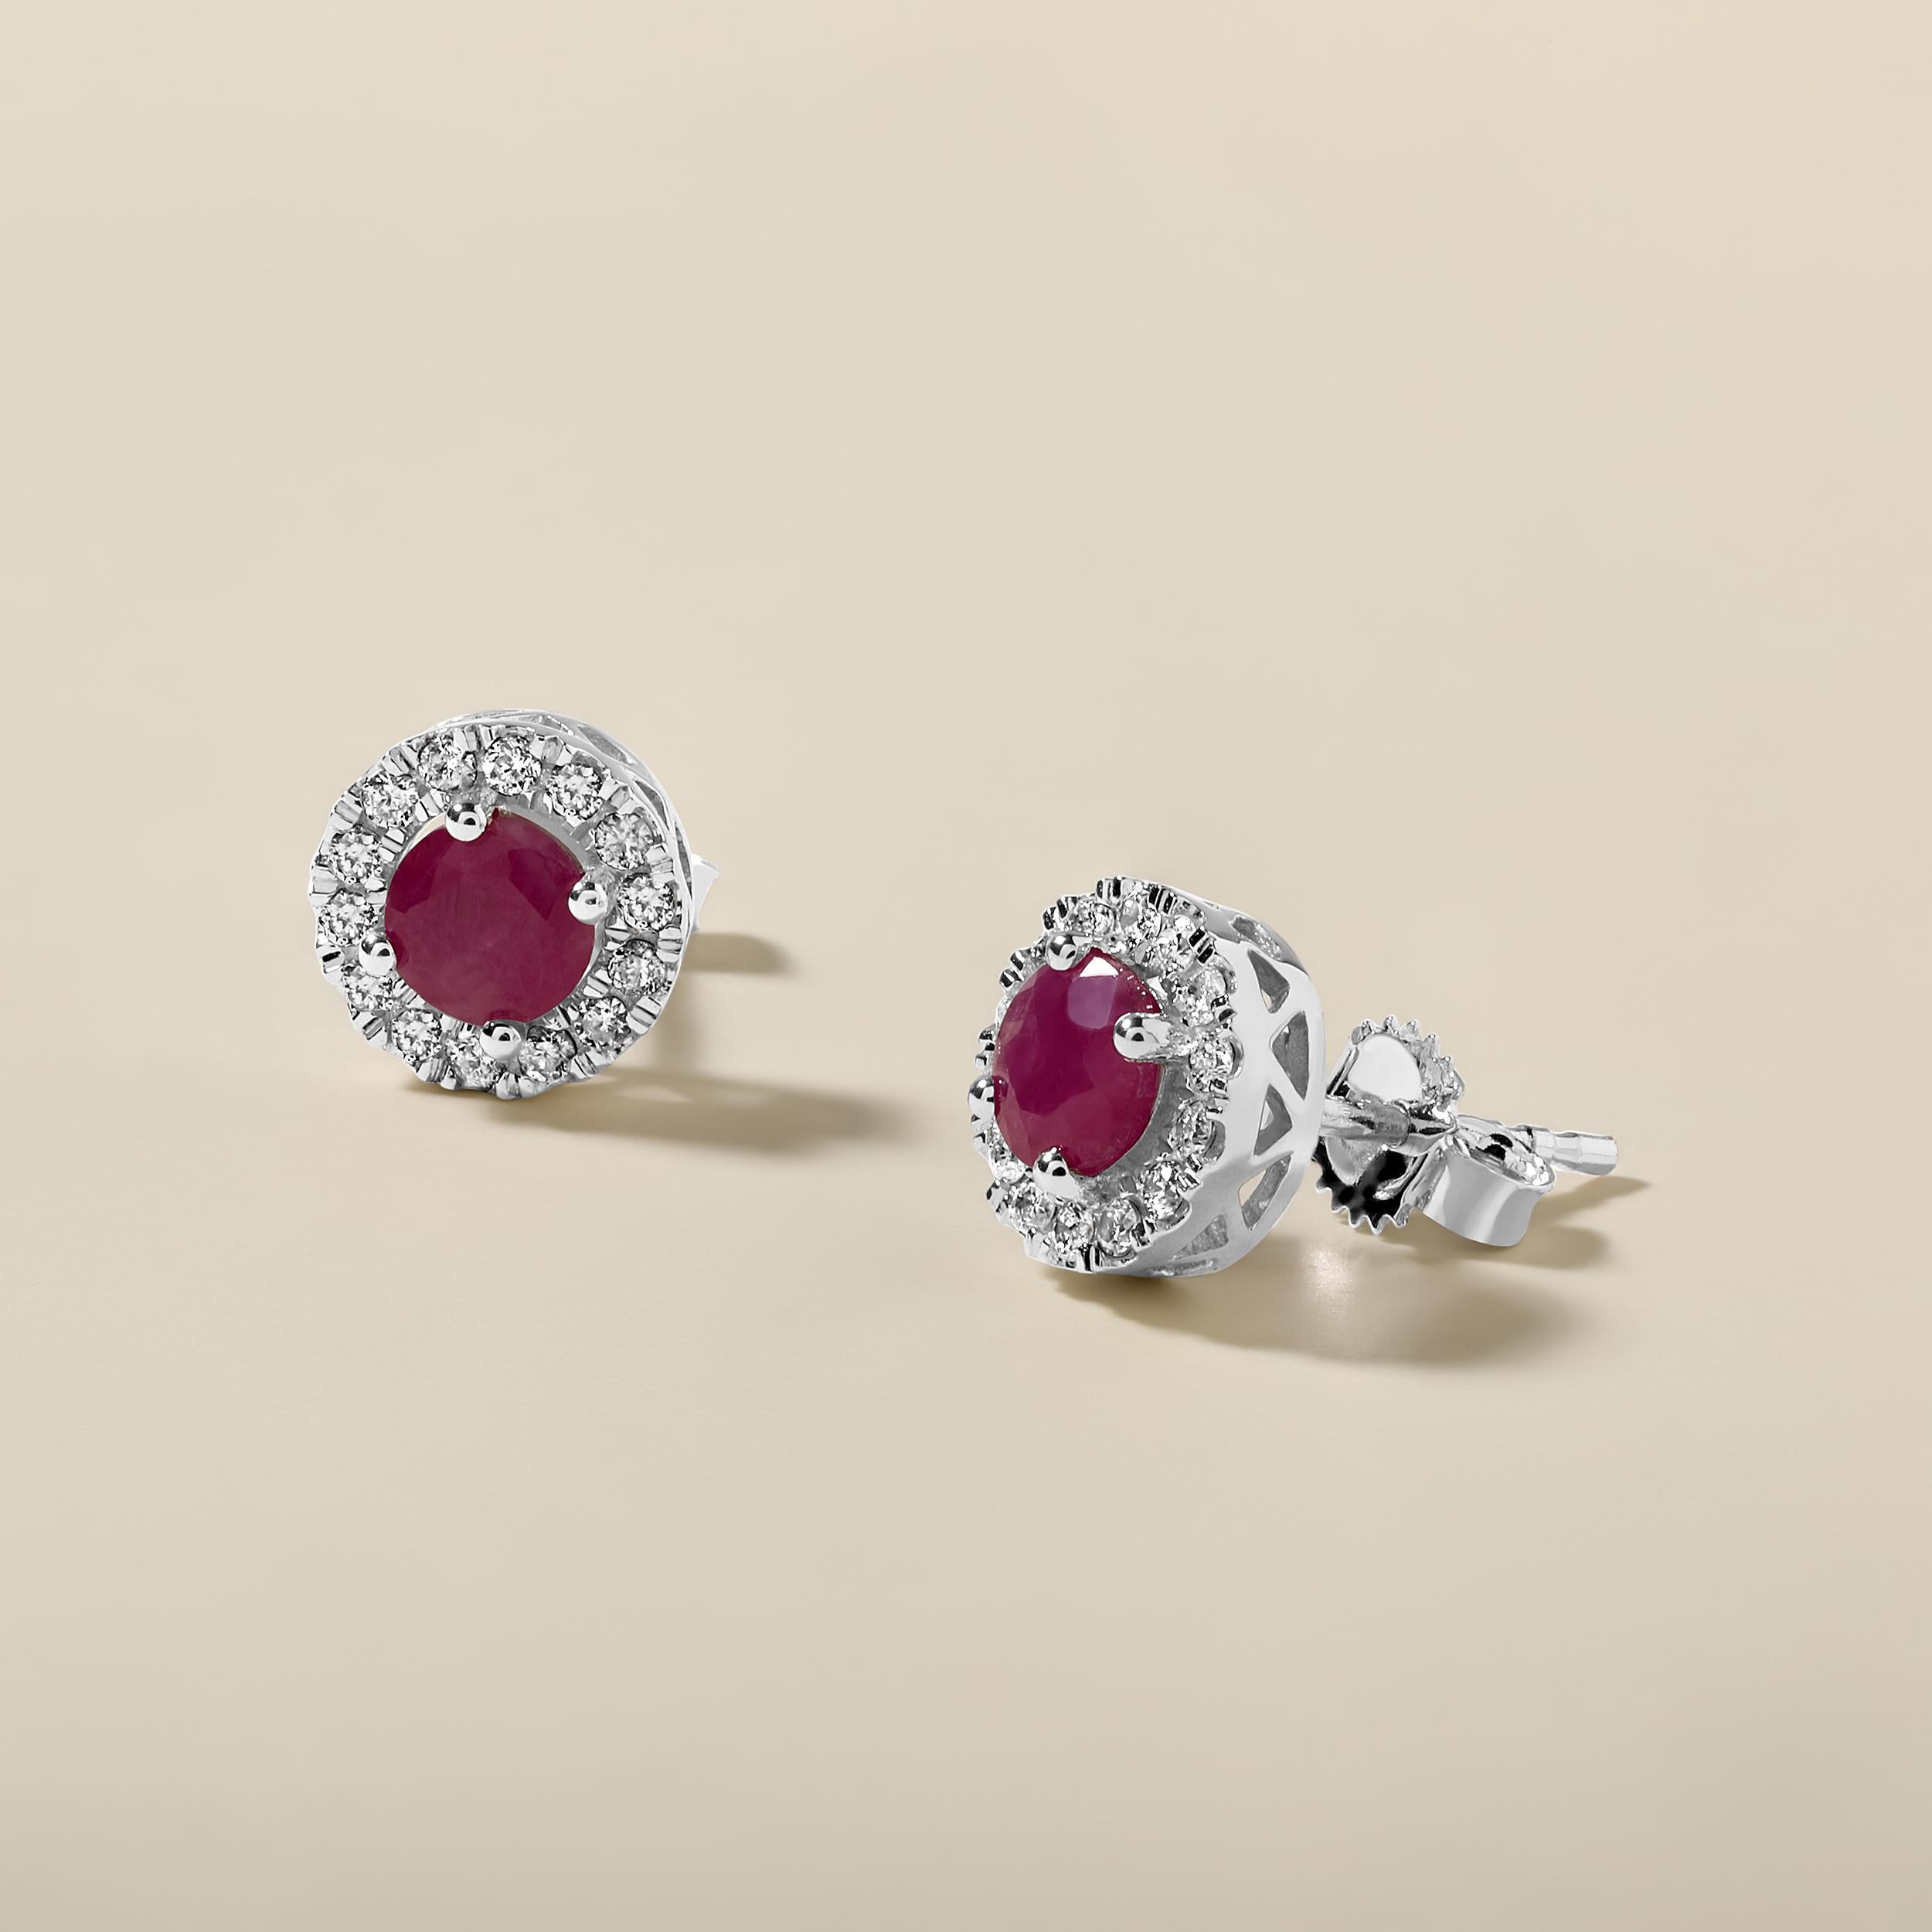 Crafted in 2.62 grams of 14K White Gold, the earrings contain 36 stones of Round Natural Diamonds with a total of 0.29 carat in F-G color and I1-I2 clarity combined with 2 stones of Round Shaped Natural Ruby Gemstones with a total of 1.27